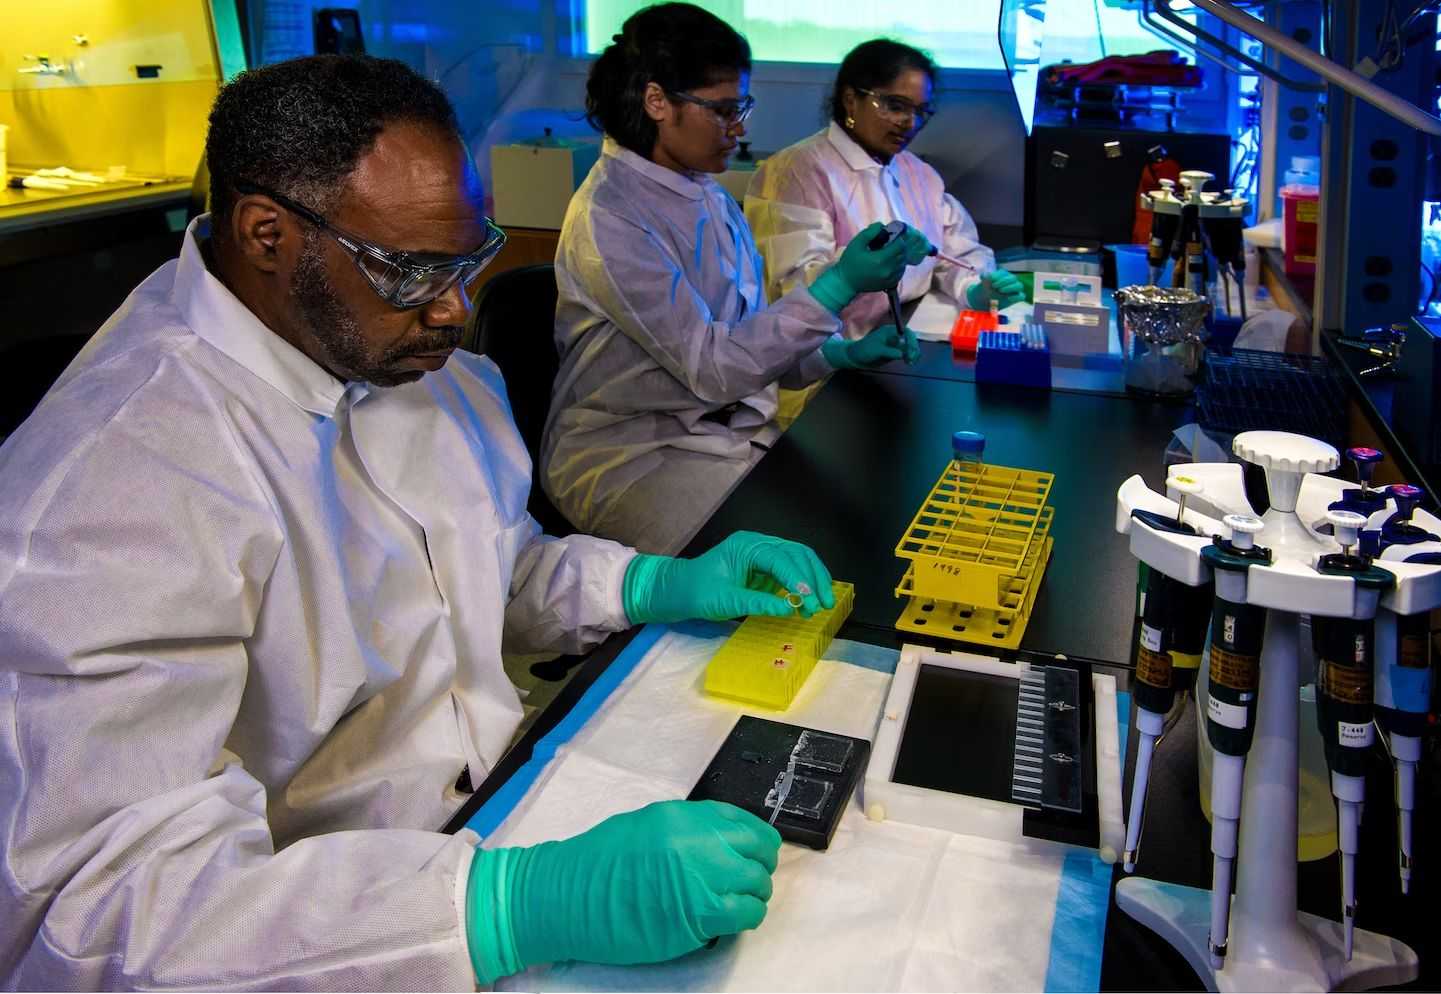 Lab workers working with various tests